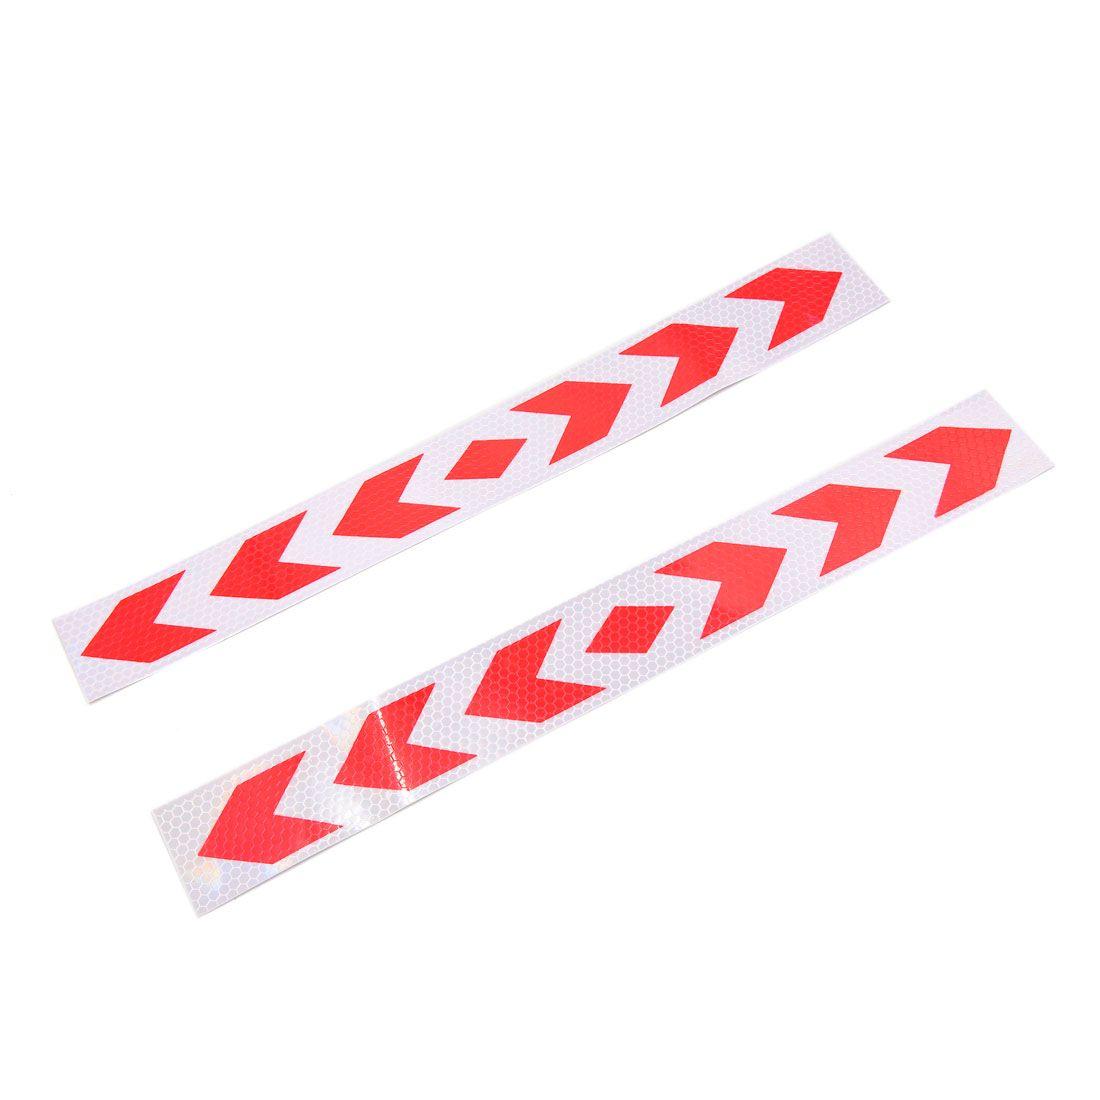 Arrows with Red and White Logo - 2Pcs Red White Arrows Pattern Car Reflective Sticker Safety Warning